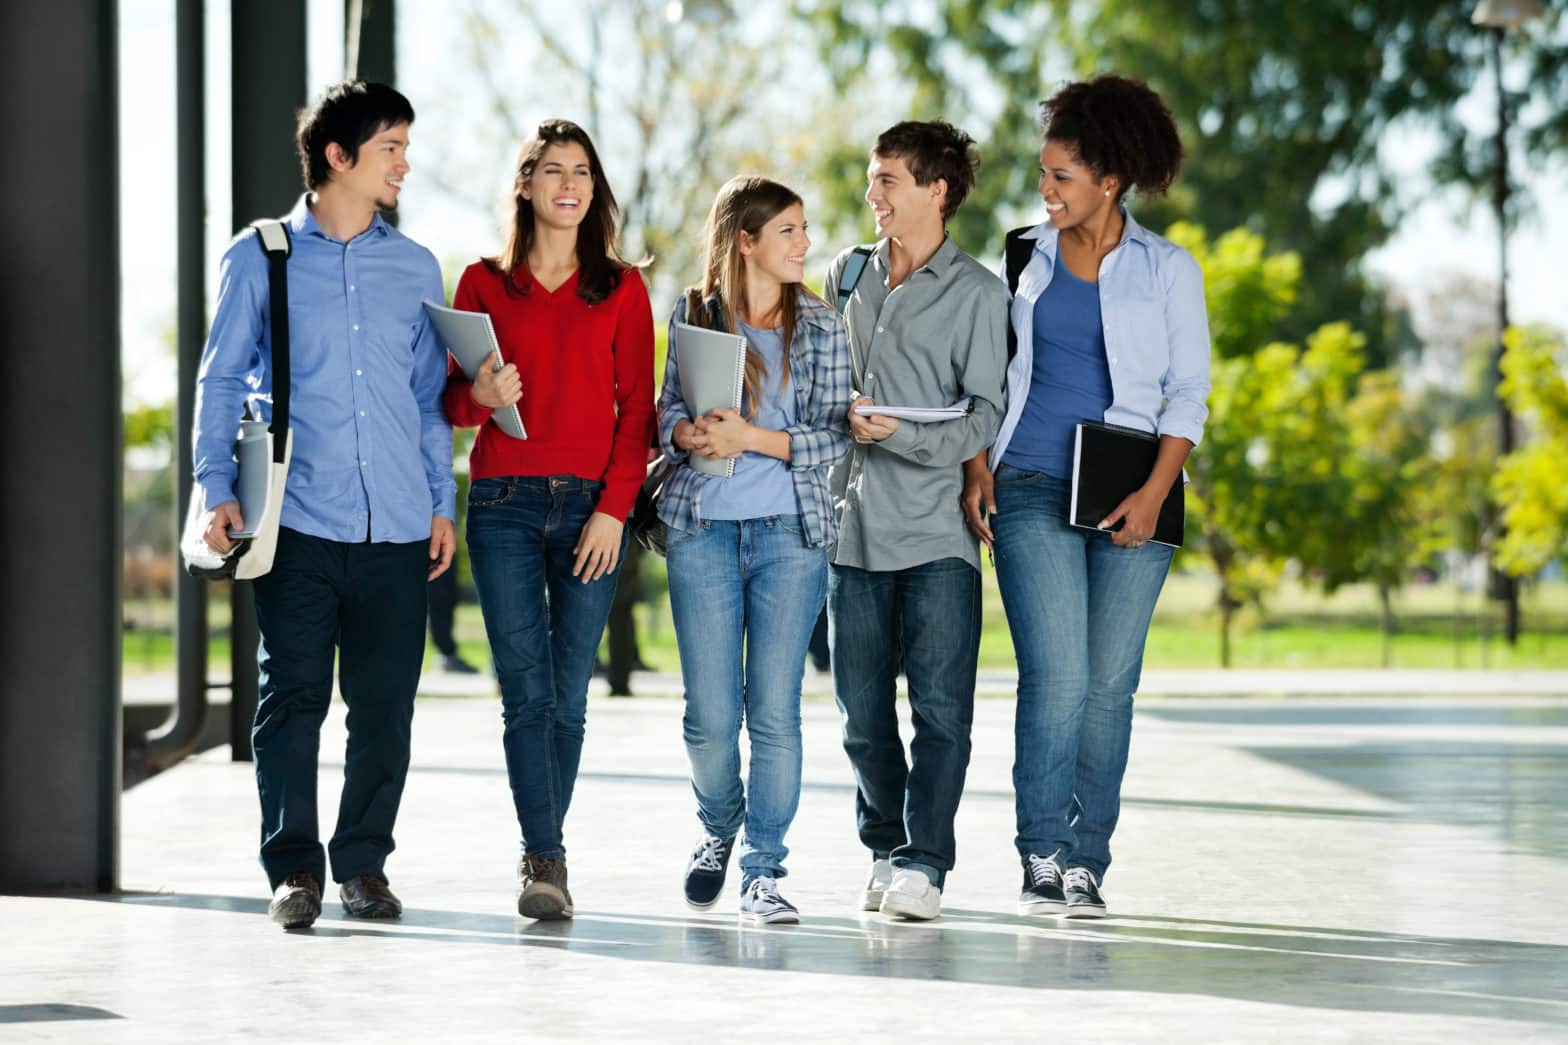 happy college students walking together on campus